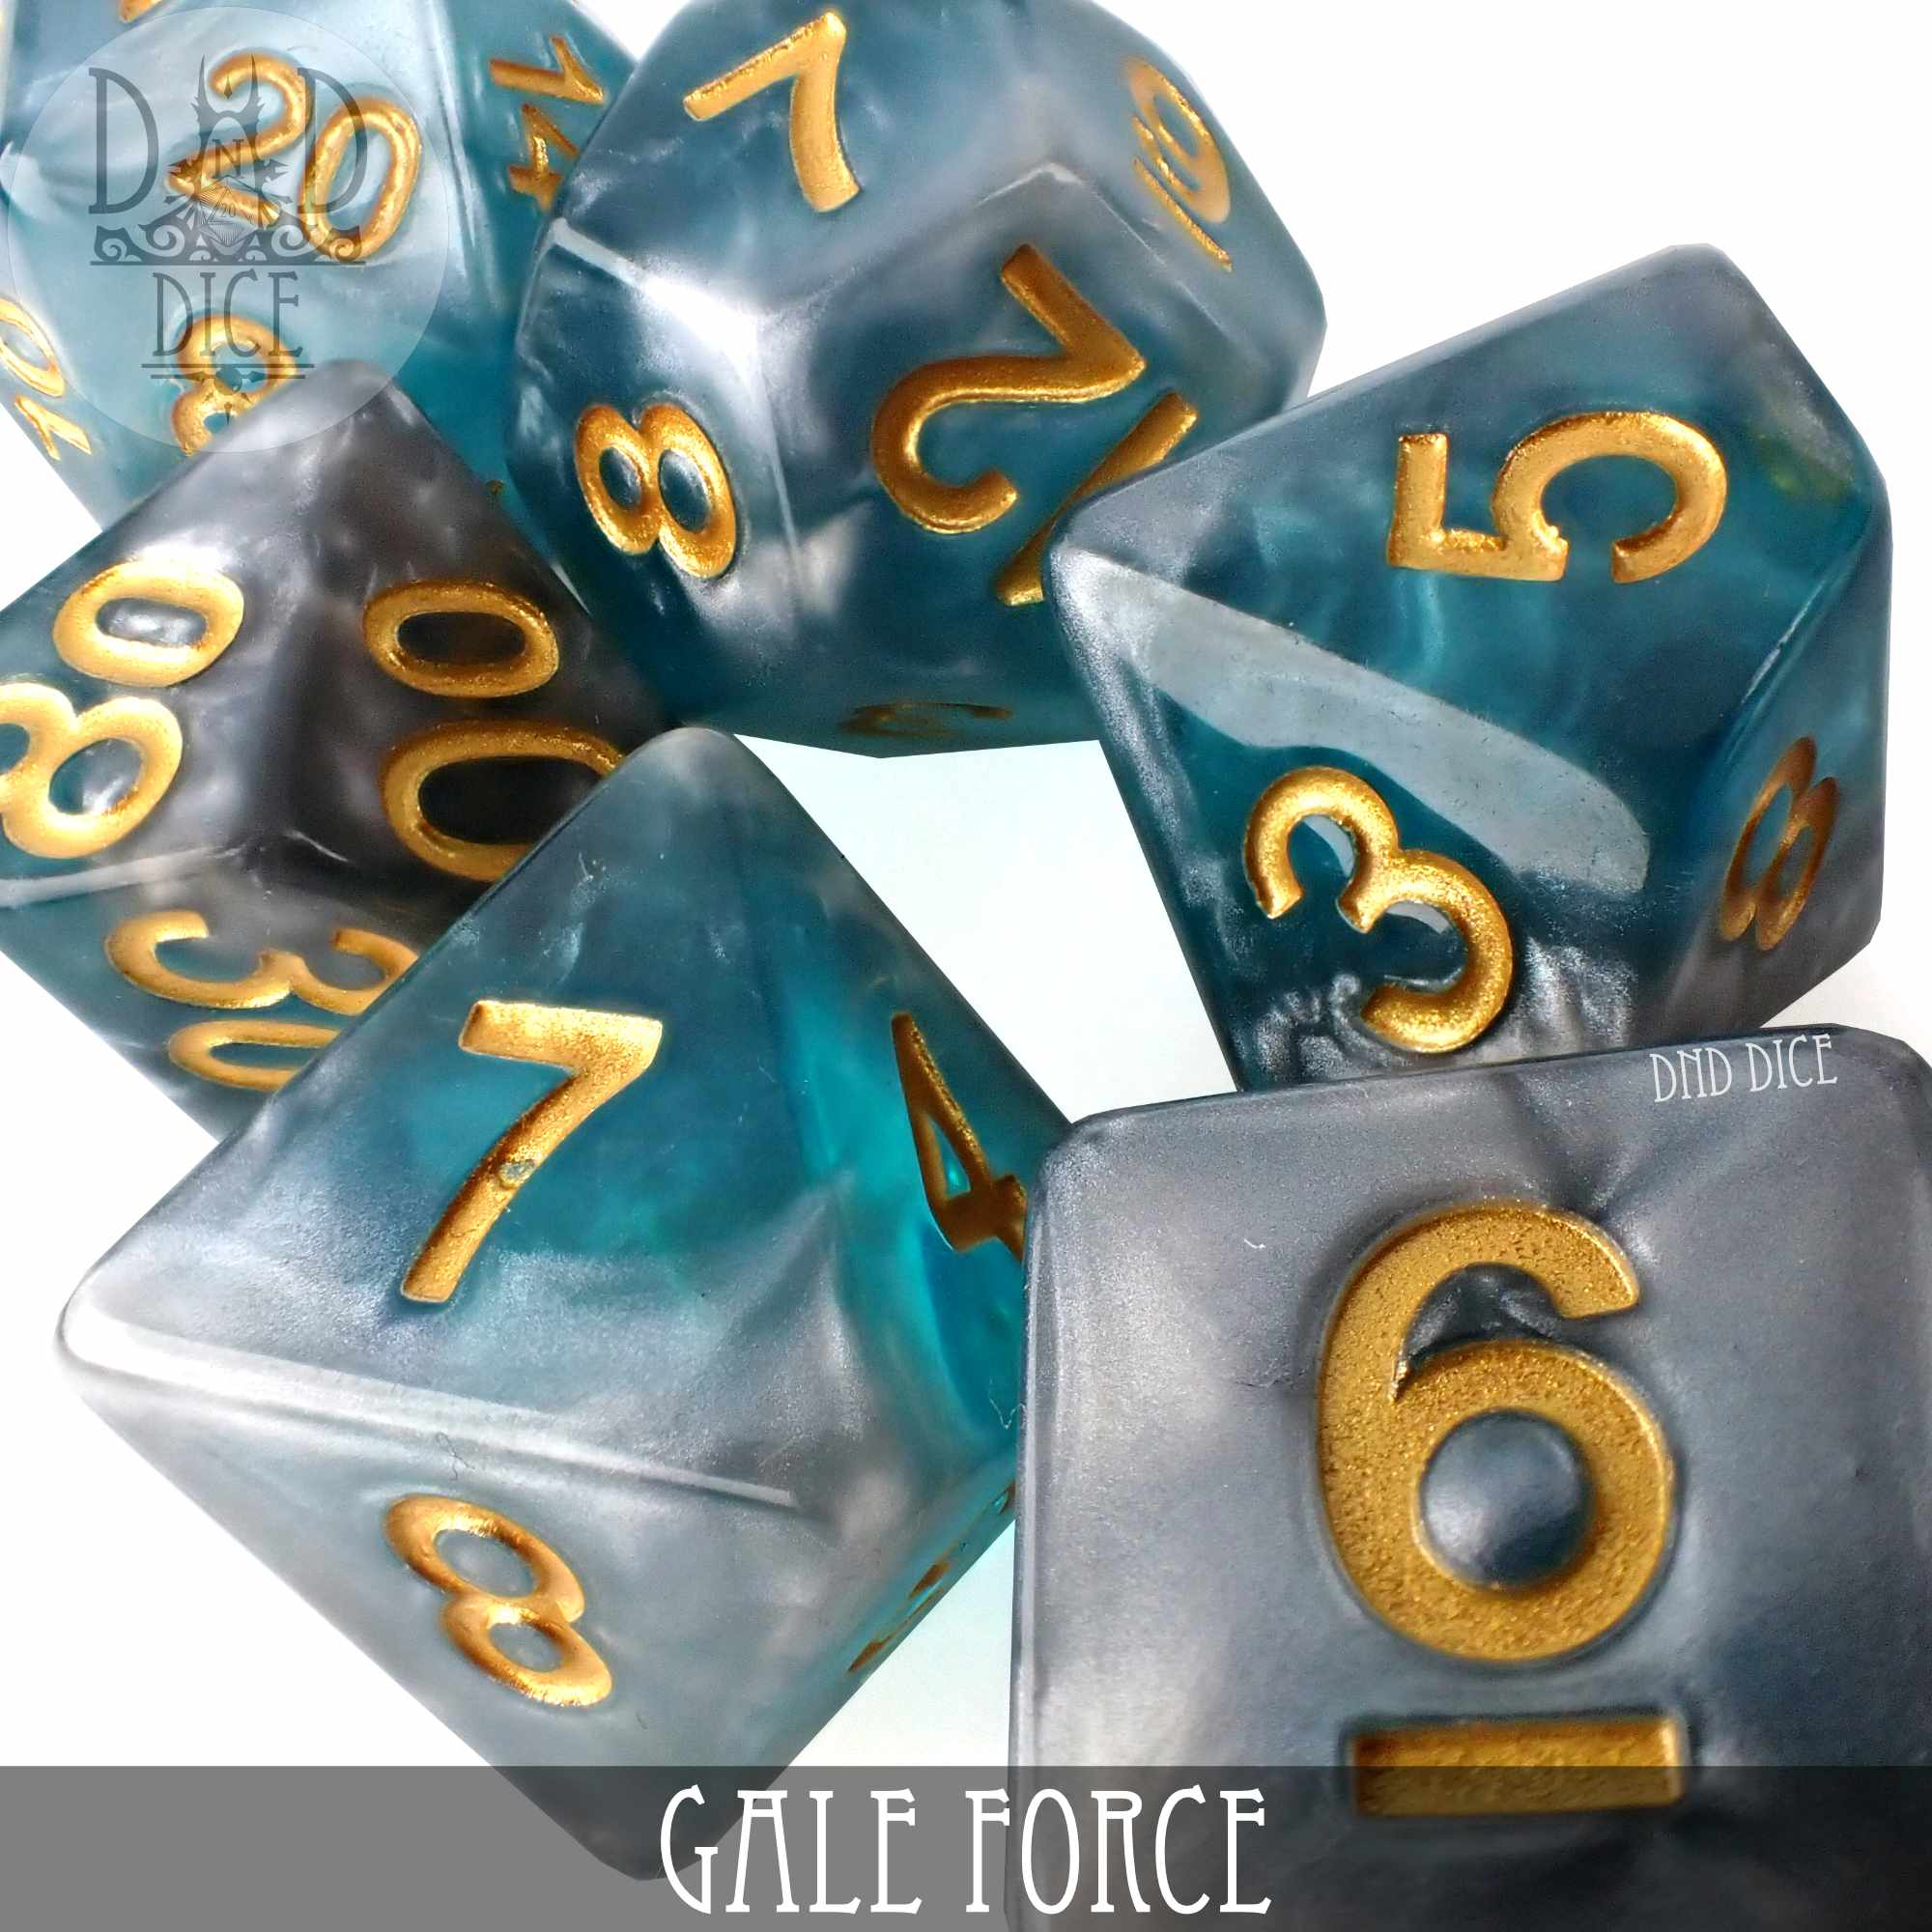 Gale Force Dice Set